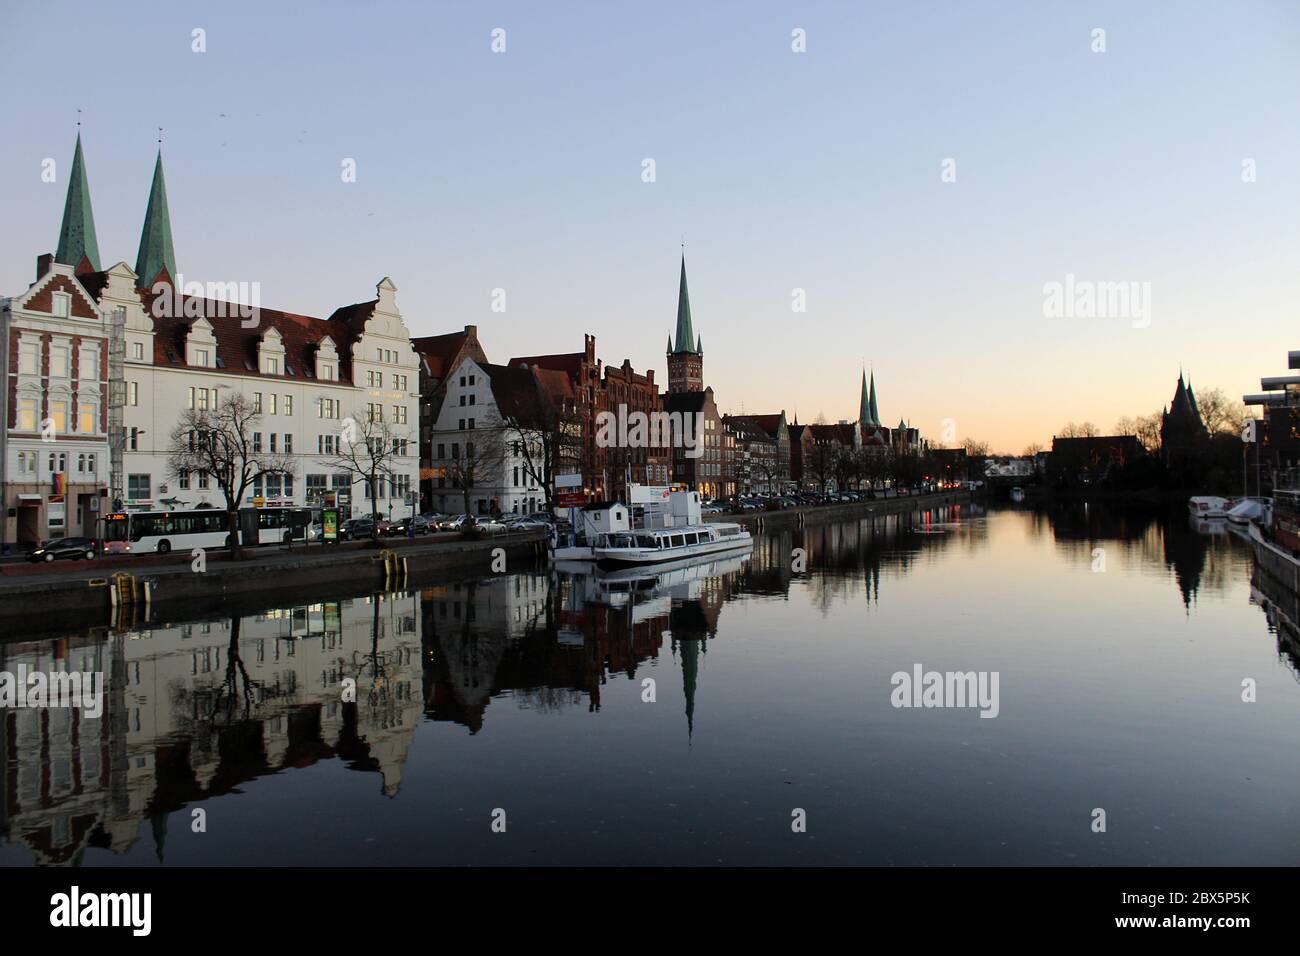 Luebeck, Germany - 2 Dezember 2016: View of Luebeck and the river Trave at dusk. Photo taken from pedestrian brigde at 'An der Untertrave' Stock Photo